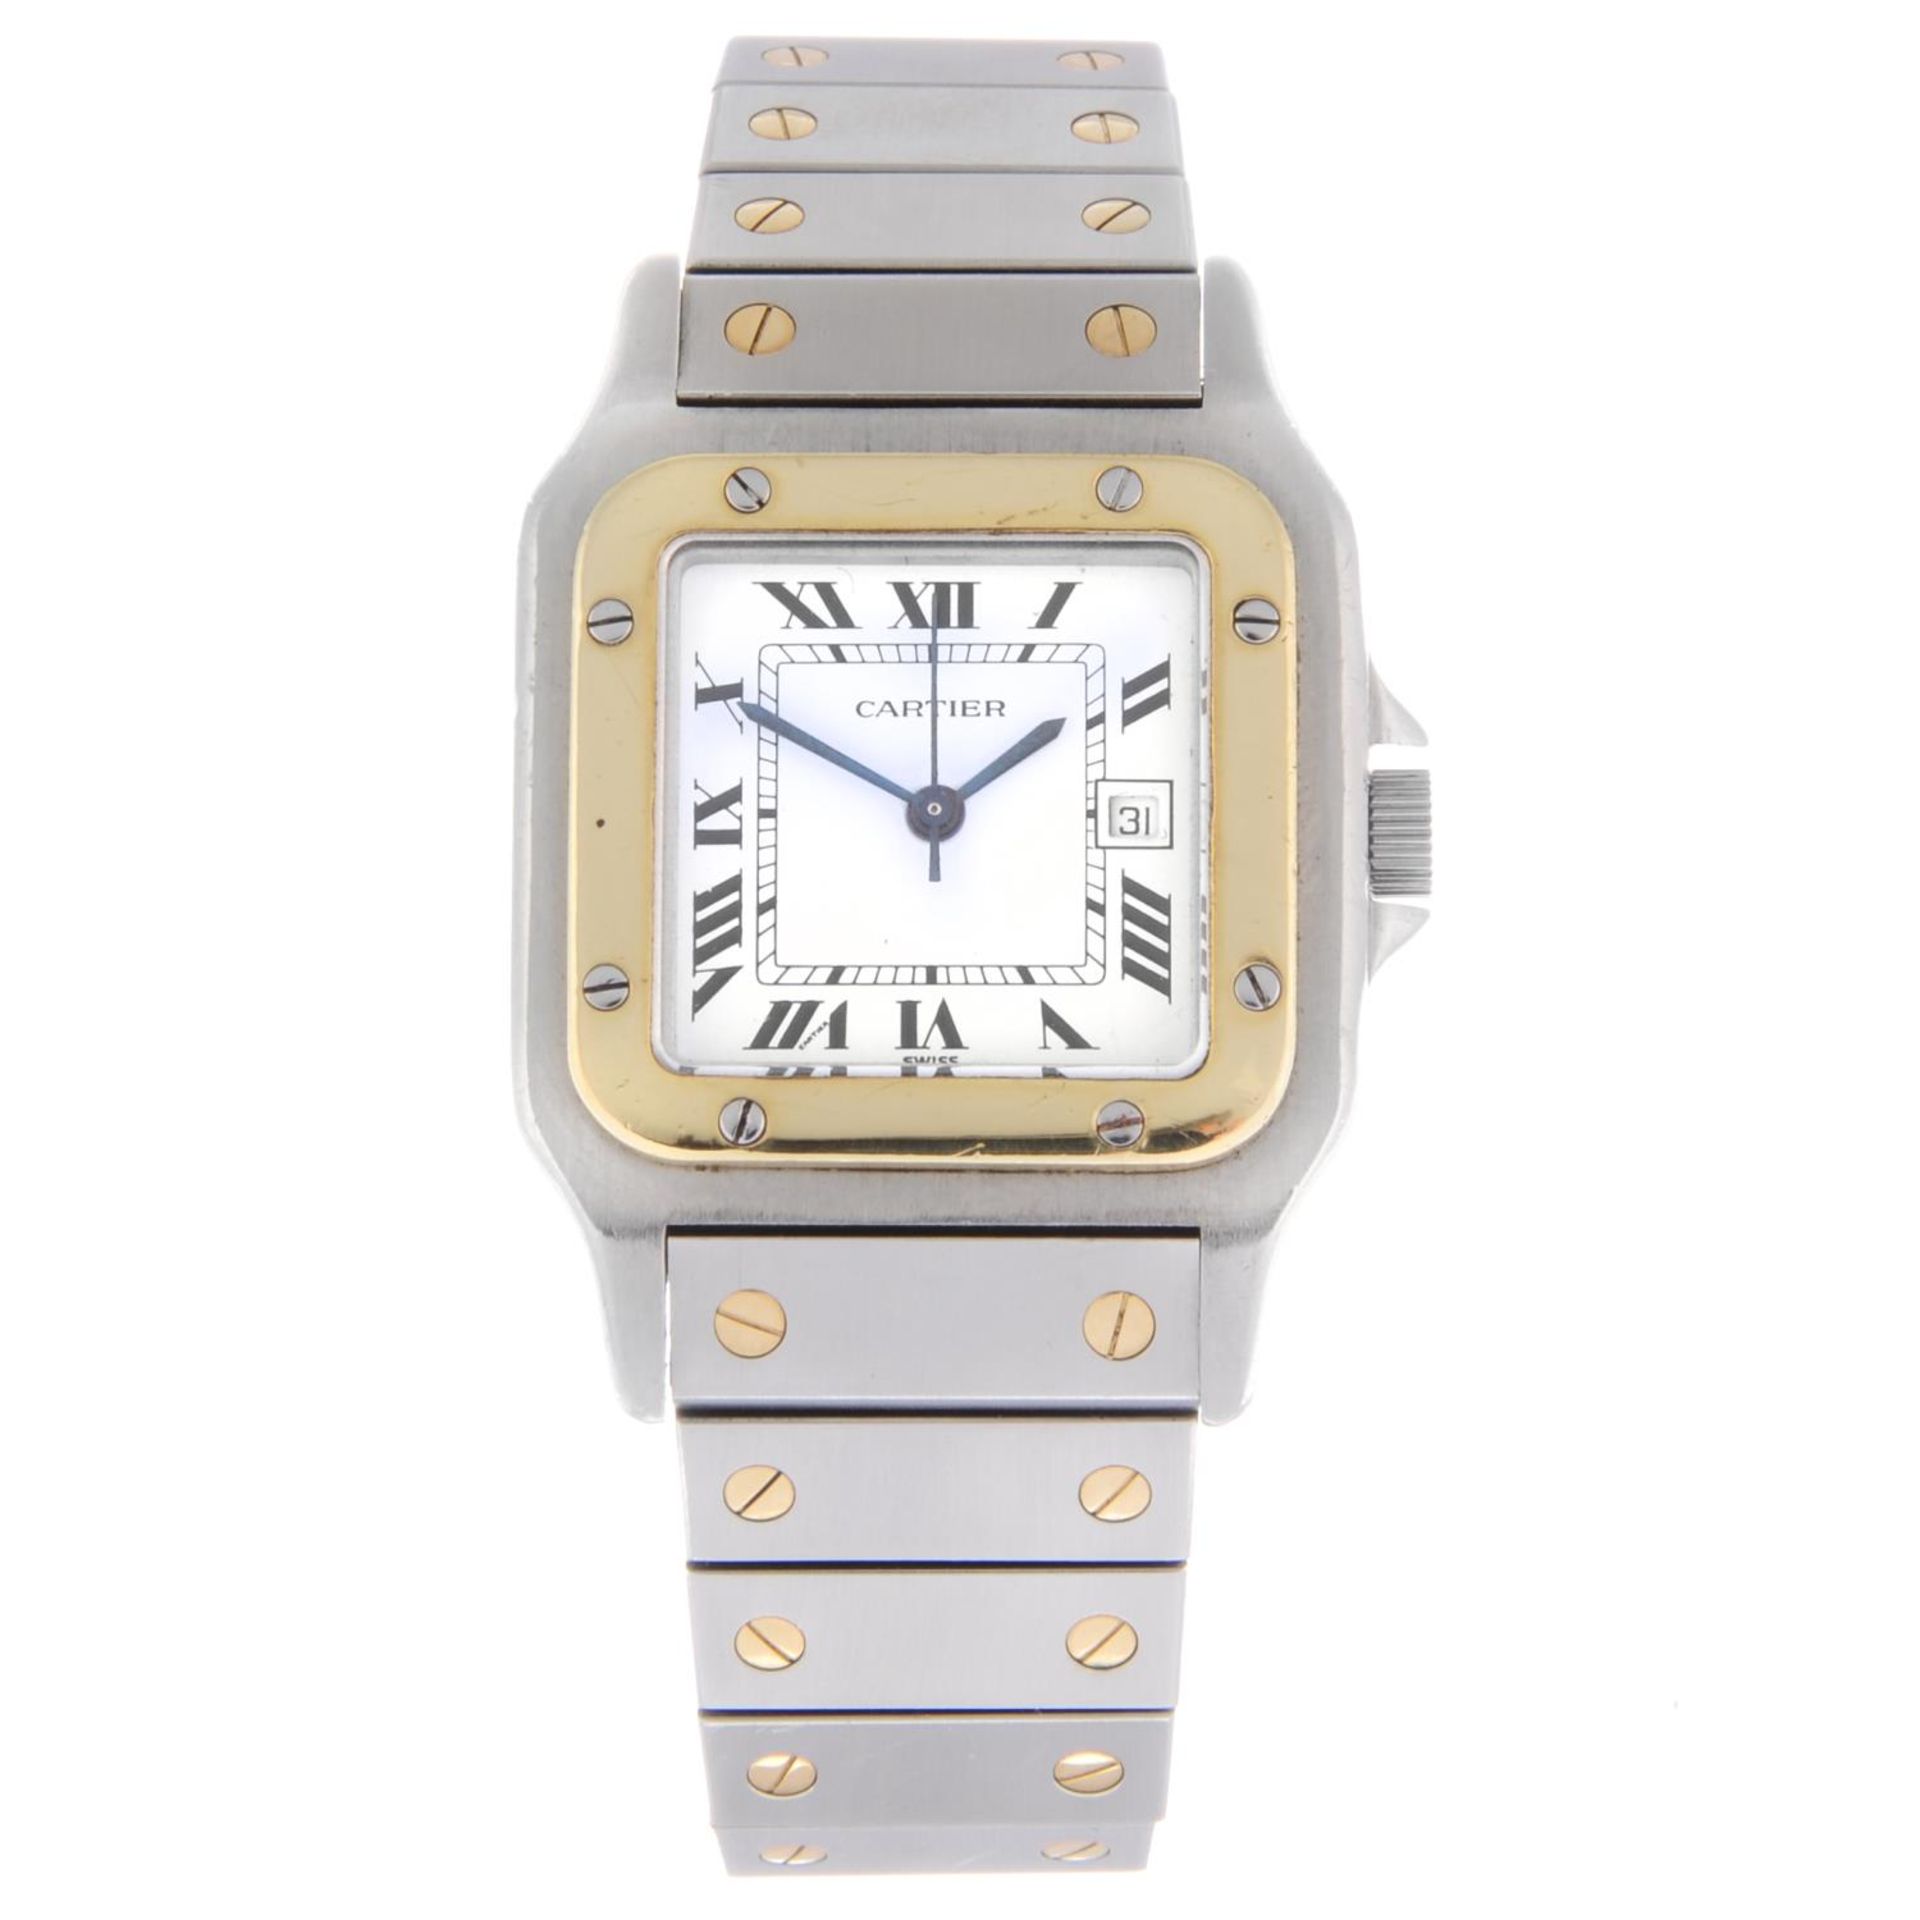 CARTIER - a mid-size Santos bracelet watch. Stainless steel case with yellow metal bezel. Numbered